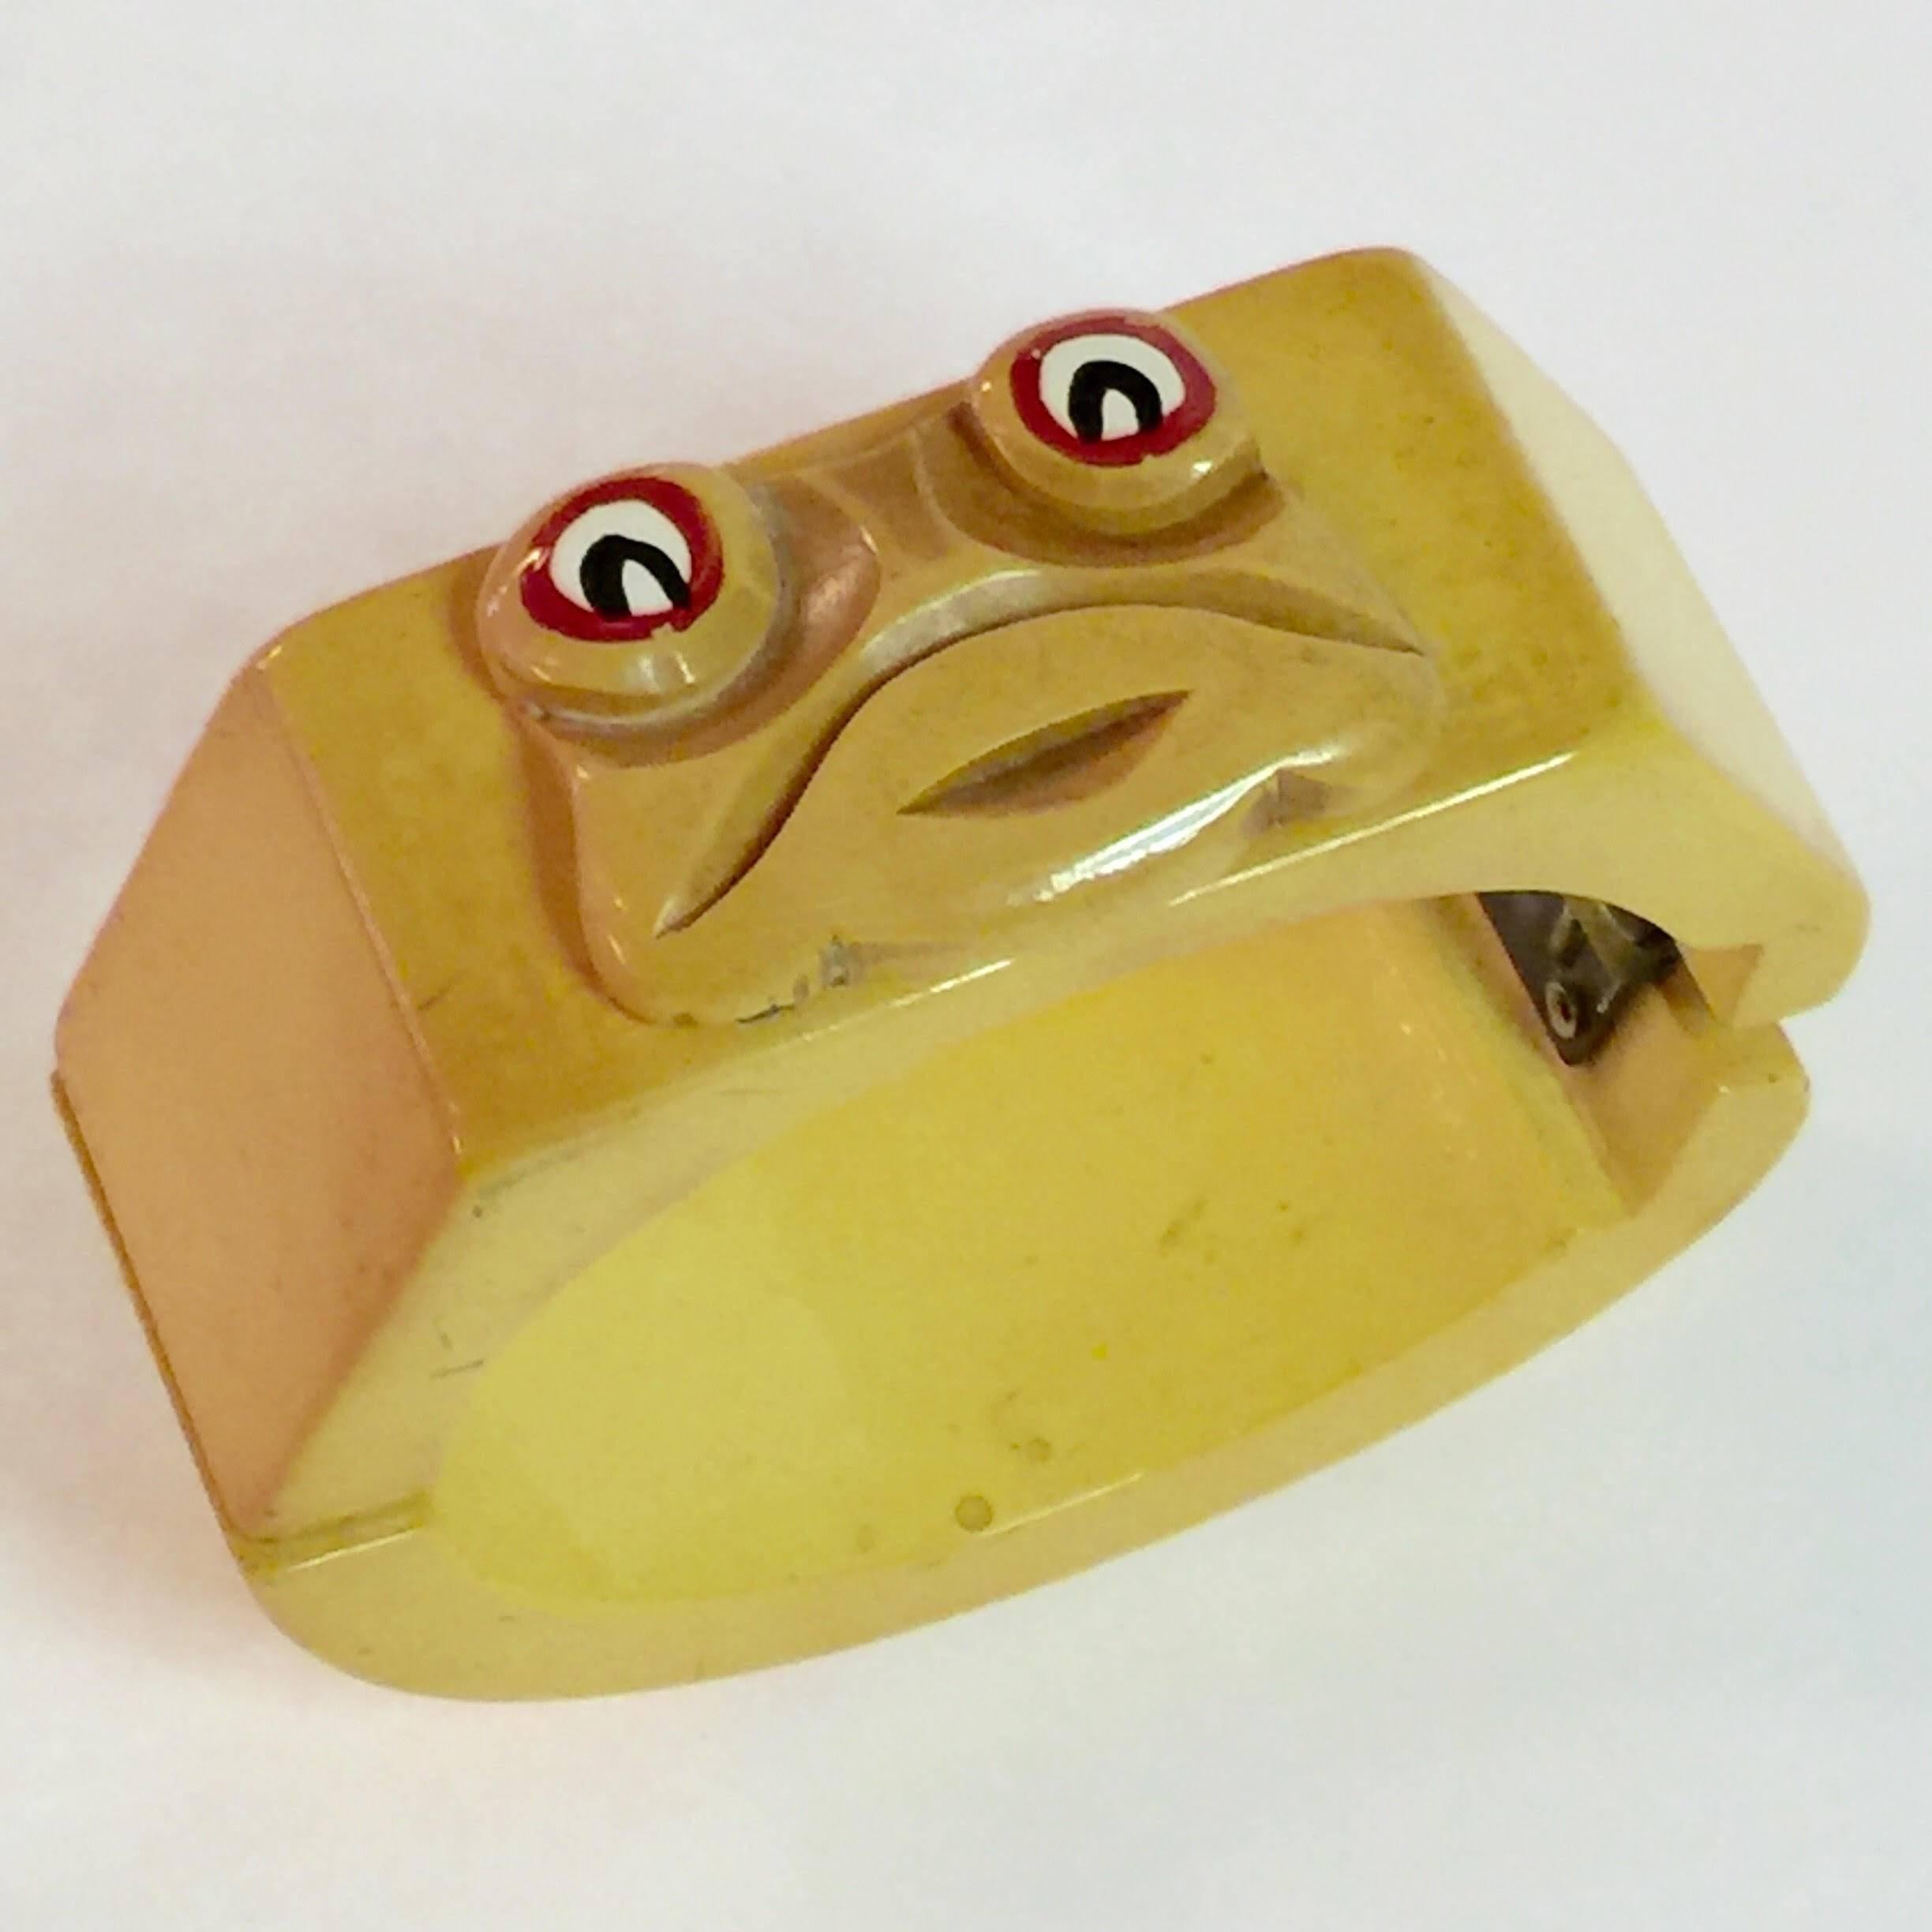 A unique piece of bakelite artistry, this very special hinged bracelet in cream is quite simple, but has an applied whimsical face of bug-eyed frog face on its  top surface. Classic figural bakelite hinge bracelets frequently feature a thematic